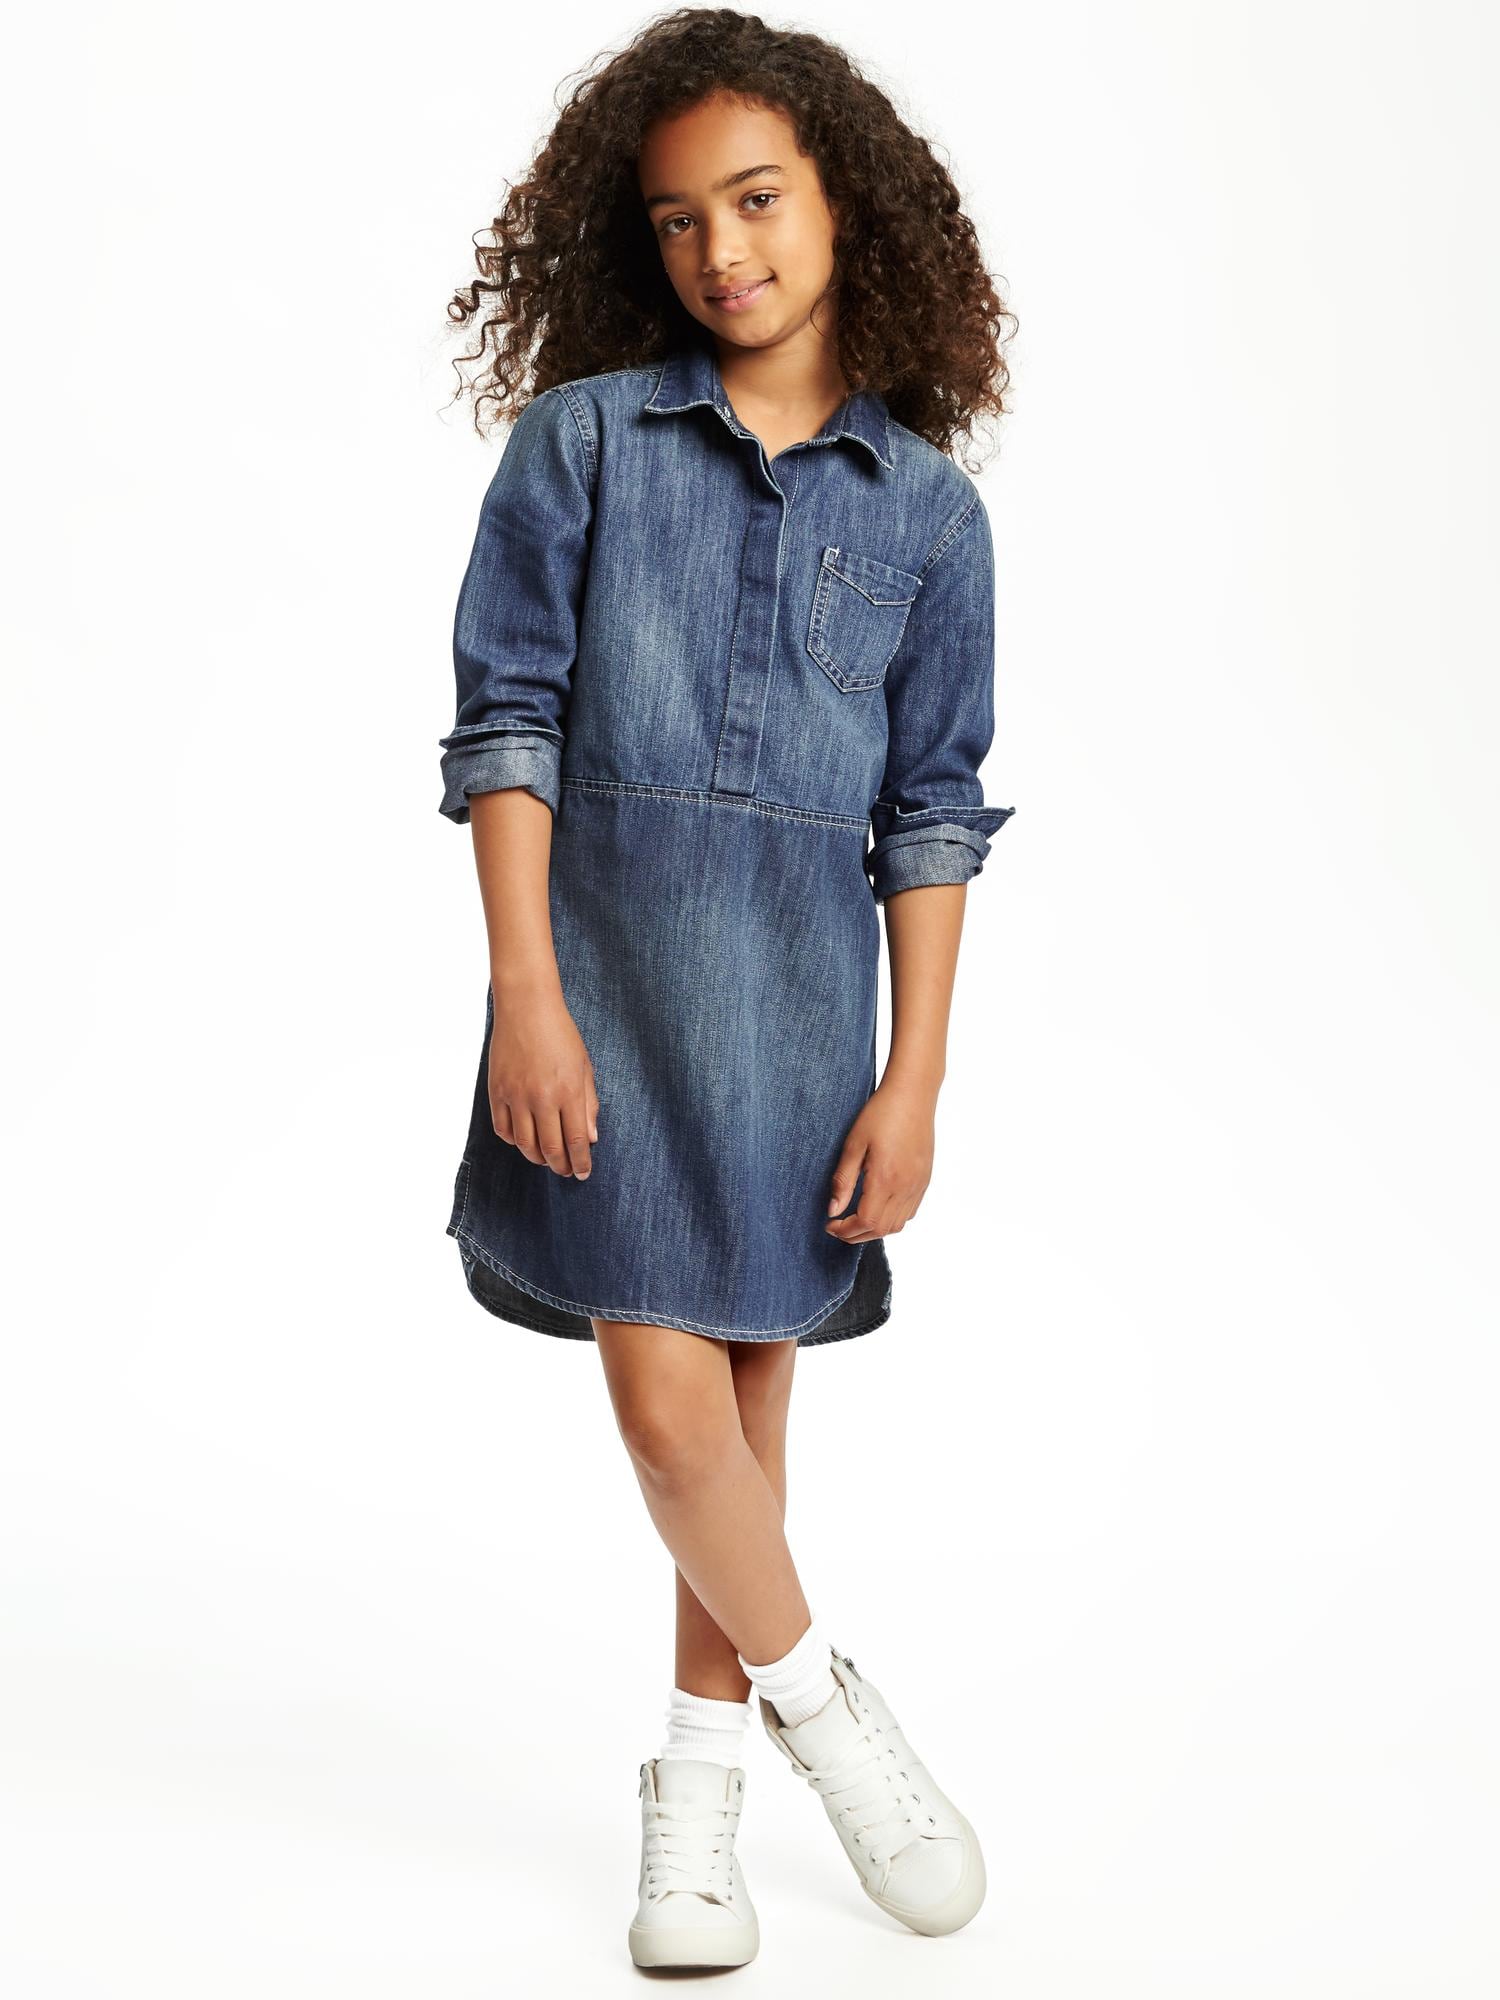 Chambray Shirt Dress for Women | Old Navy | Chambray shirt dress, Clothes  for women, Fashion